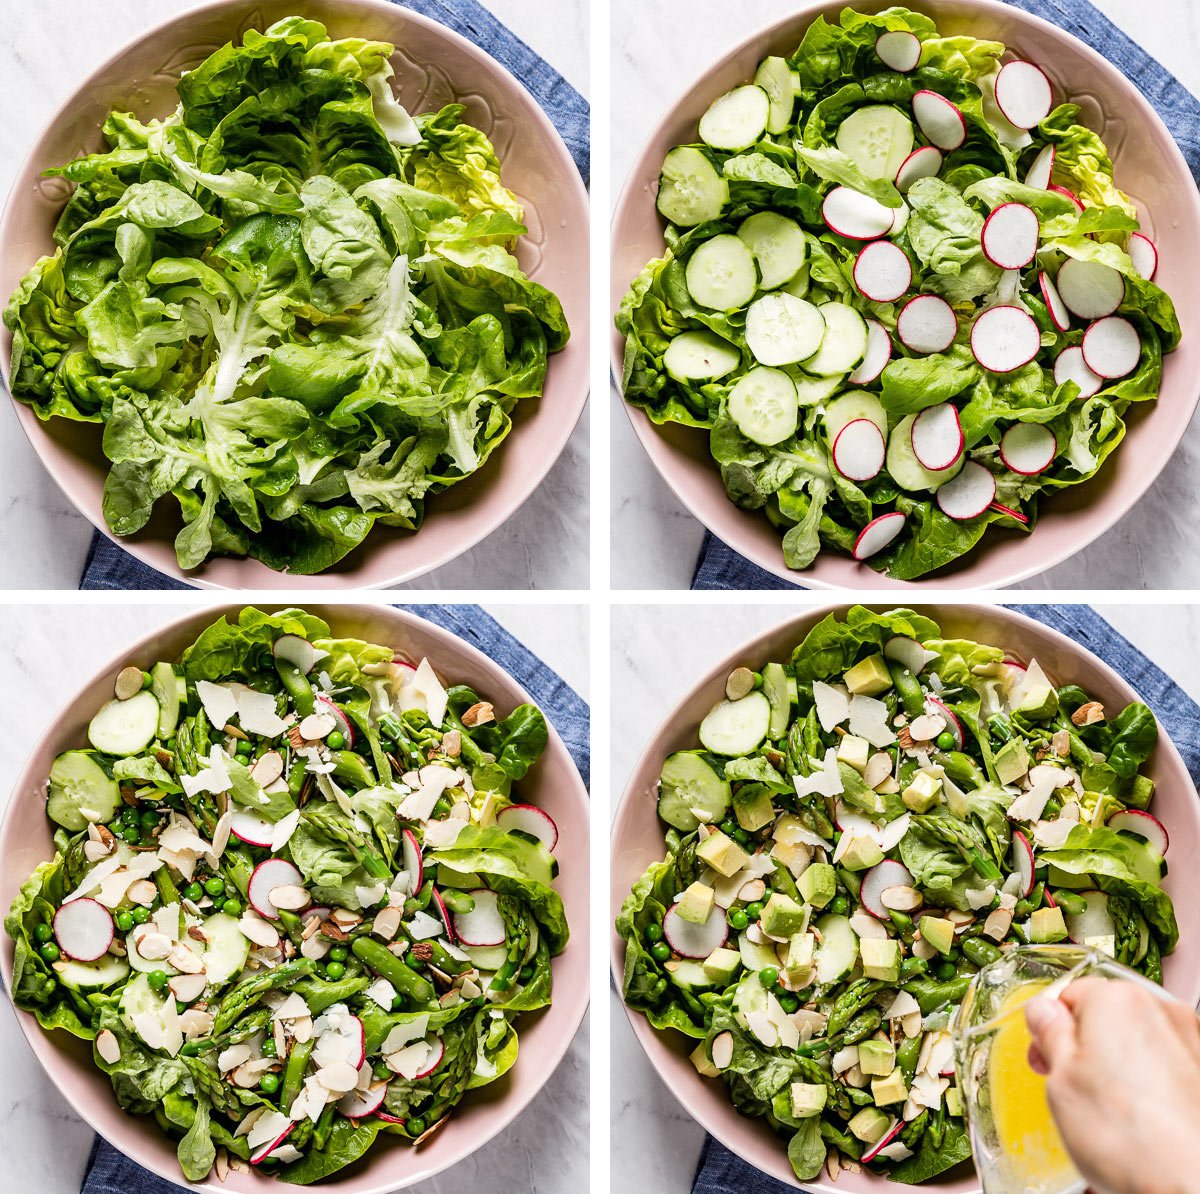 Photos showing how to assemble the salad 